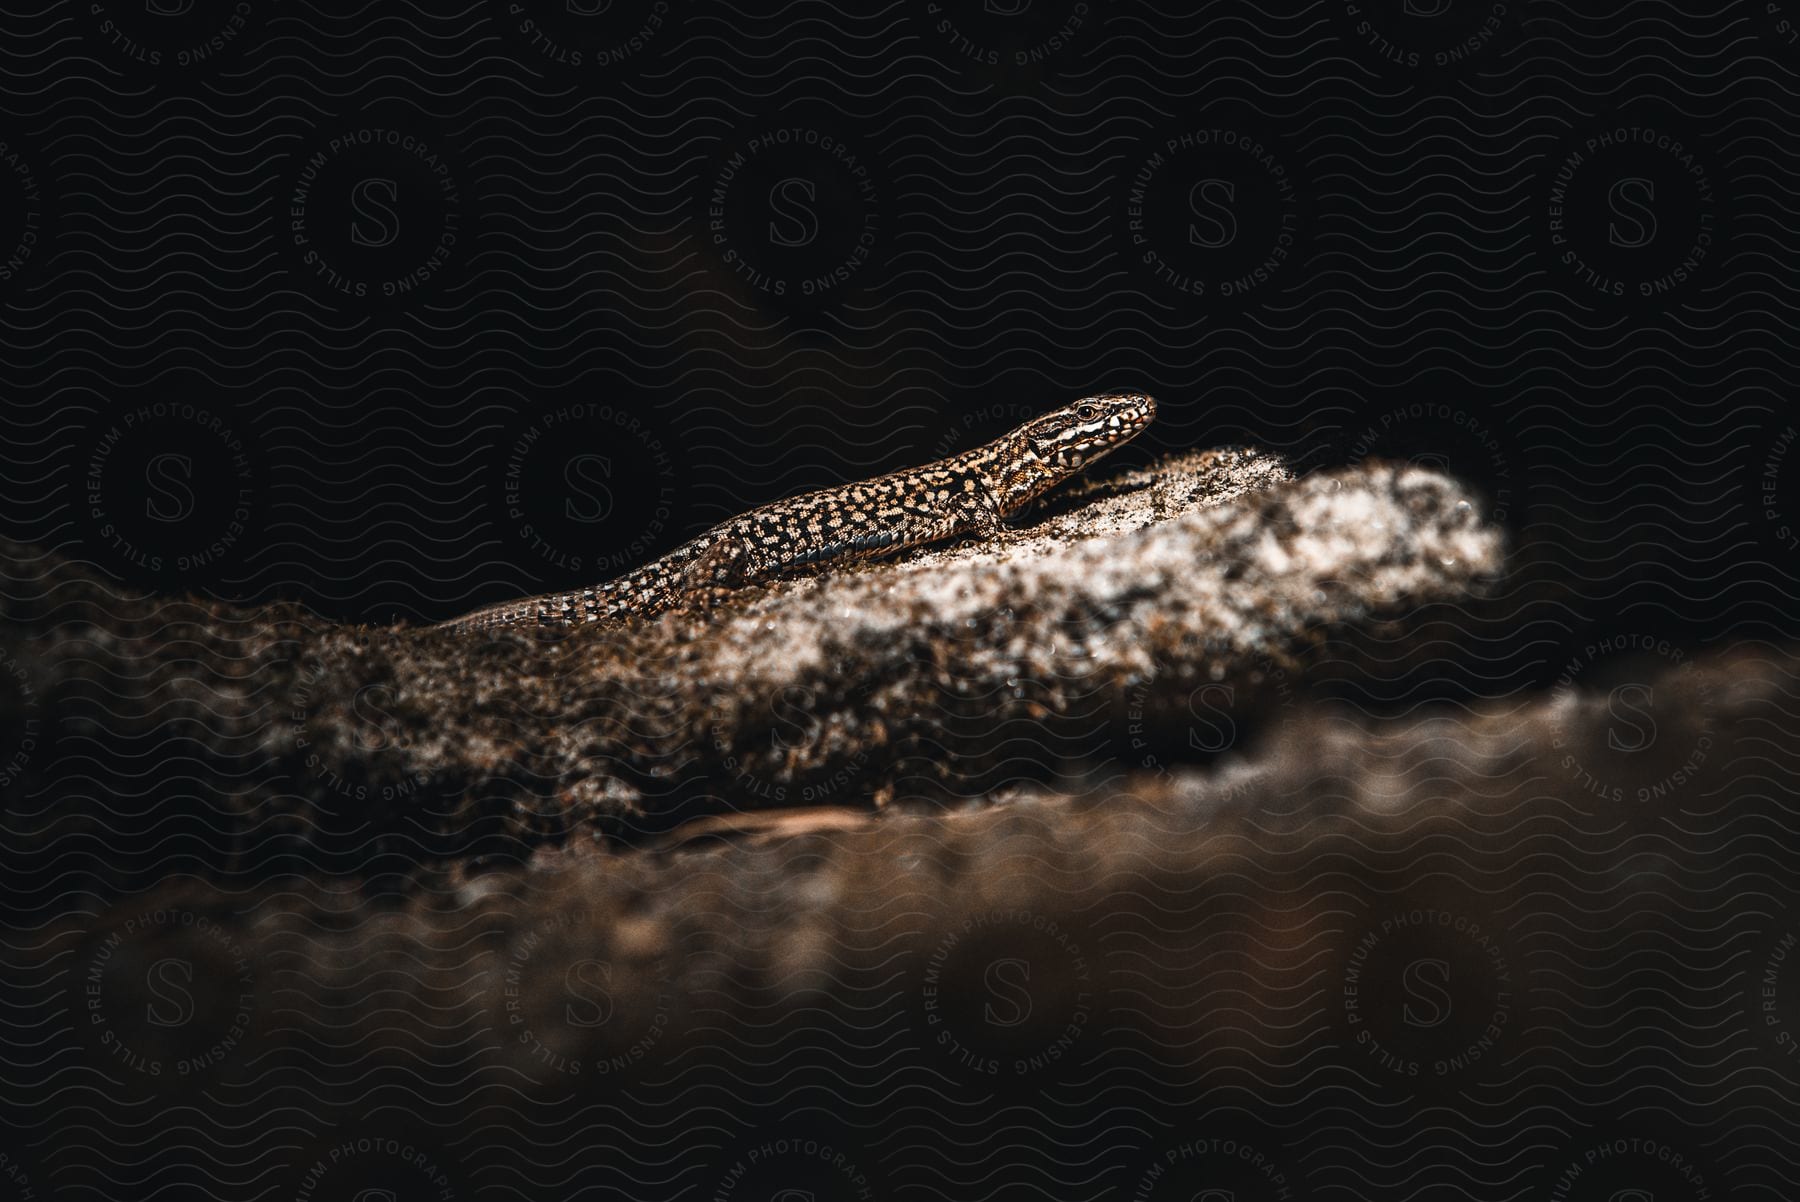 A lizard perched on a rock in a forest at night